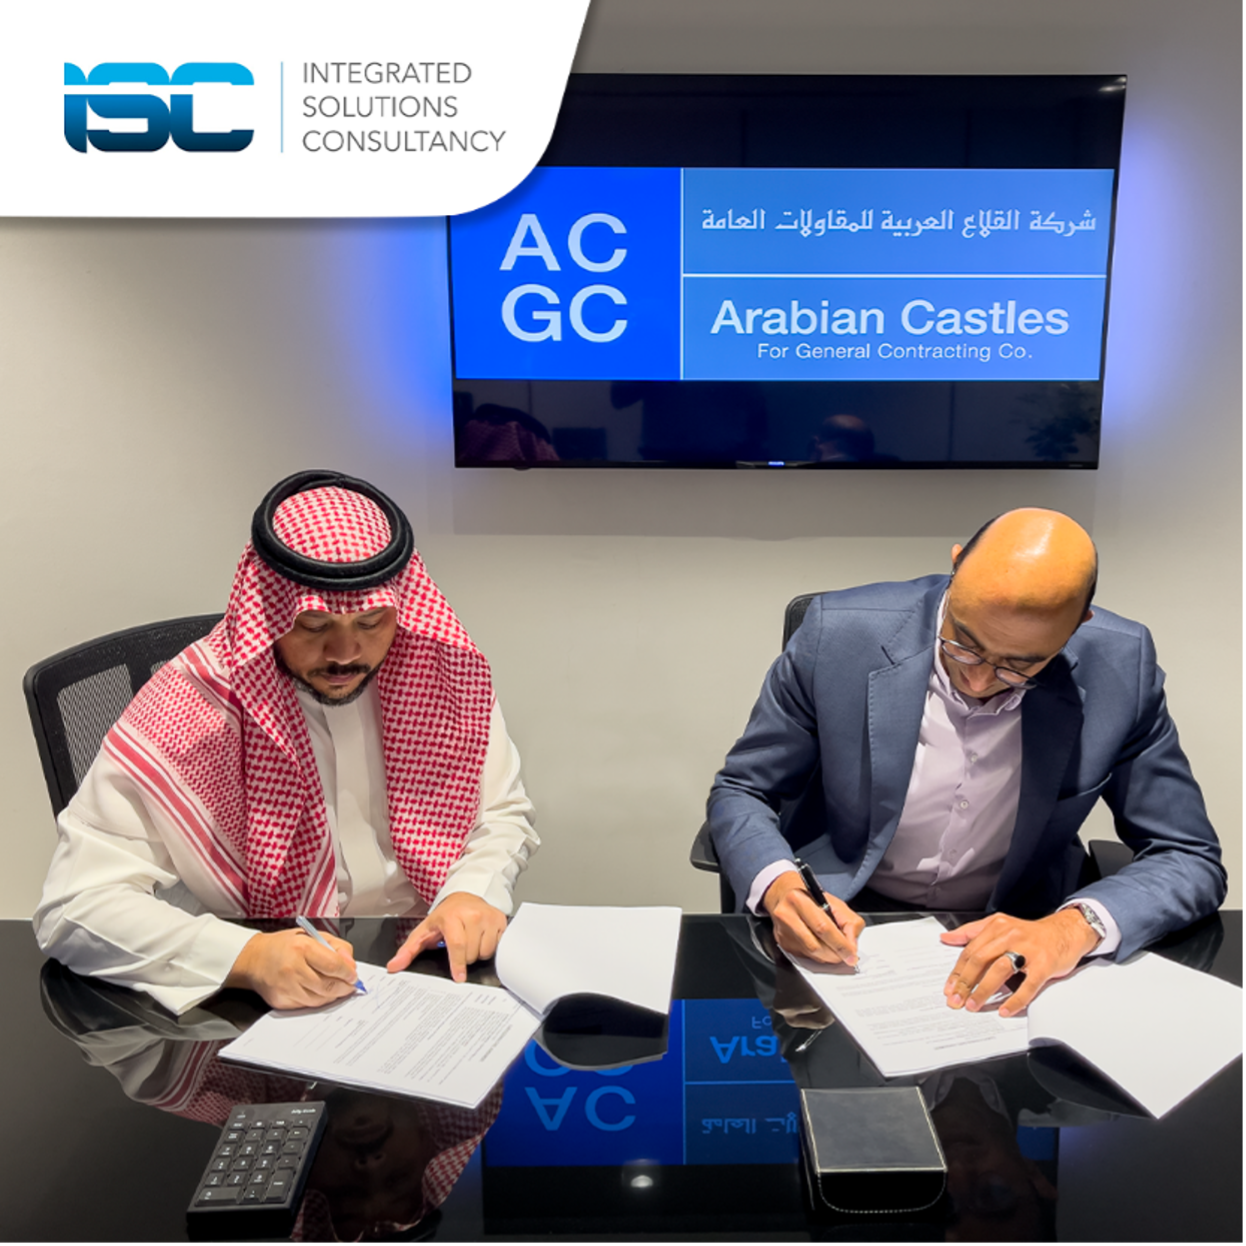 ISC is keenly expanding our involvement in the Middle East and North Africa (MENA) region and the Gulf Cooperation Council (GCC).